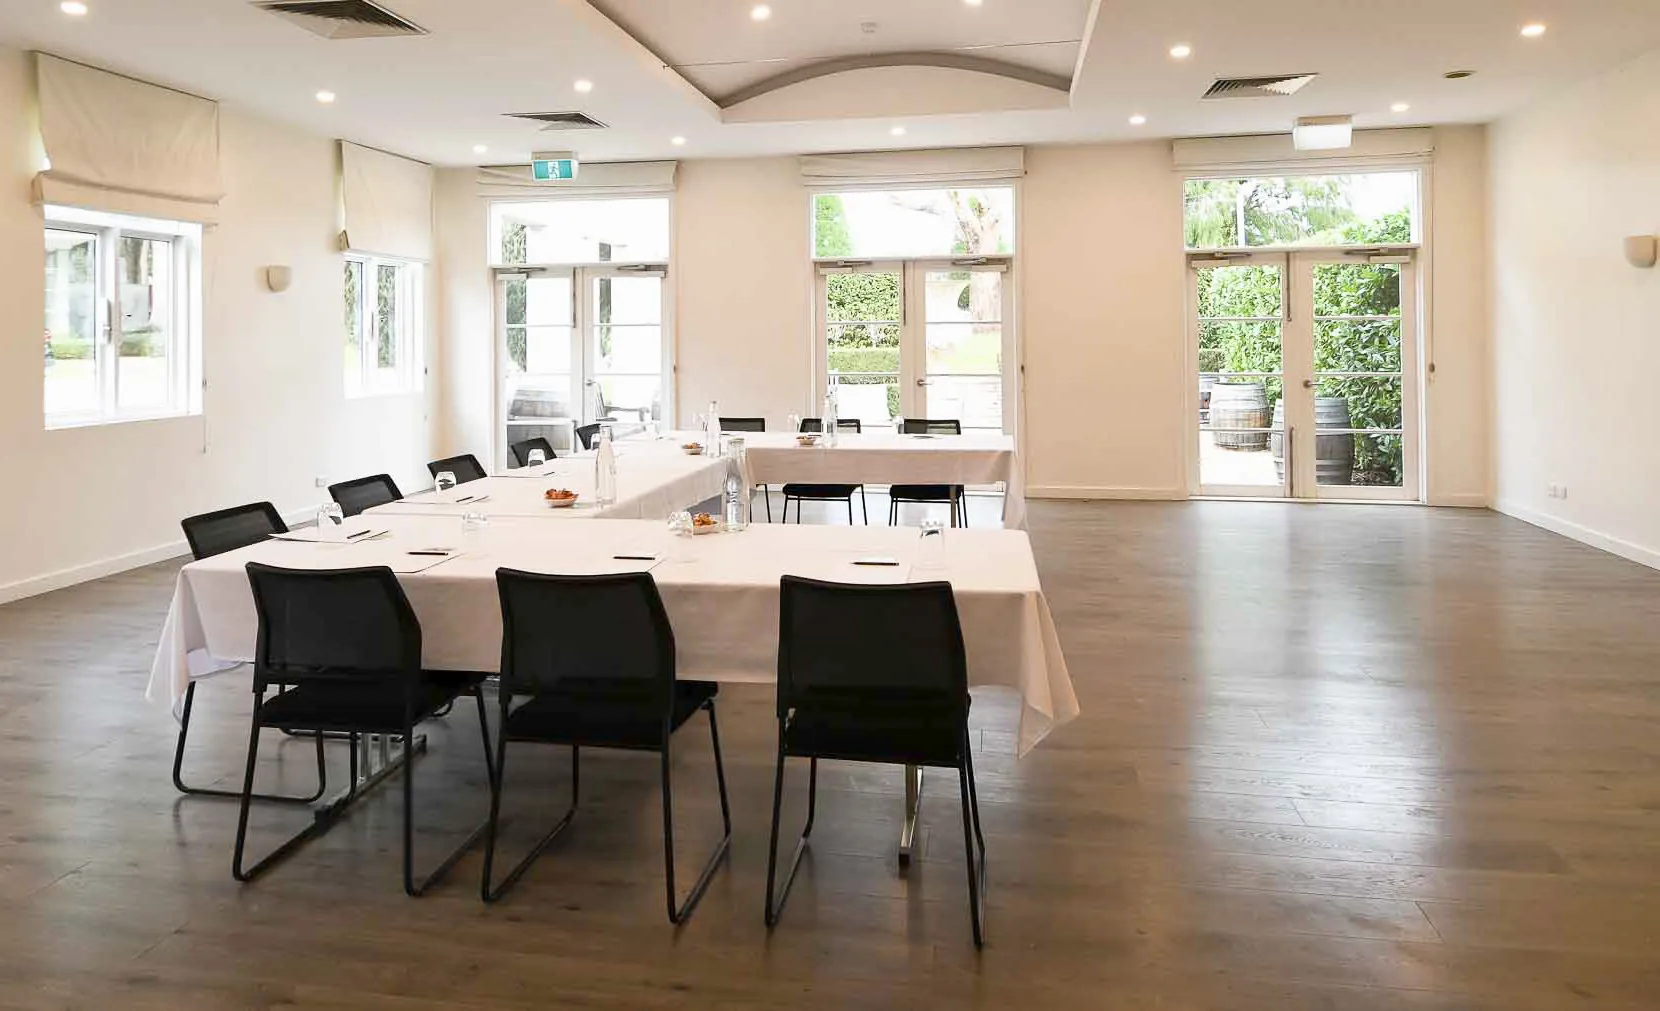 Lancemore Lindenderry Red Hill Boutique Luxury Accomodation Conference Venue Lakeview